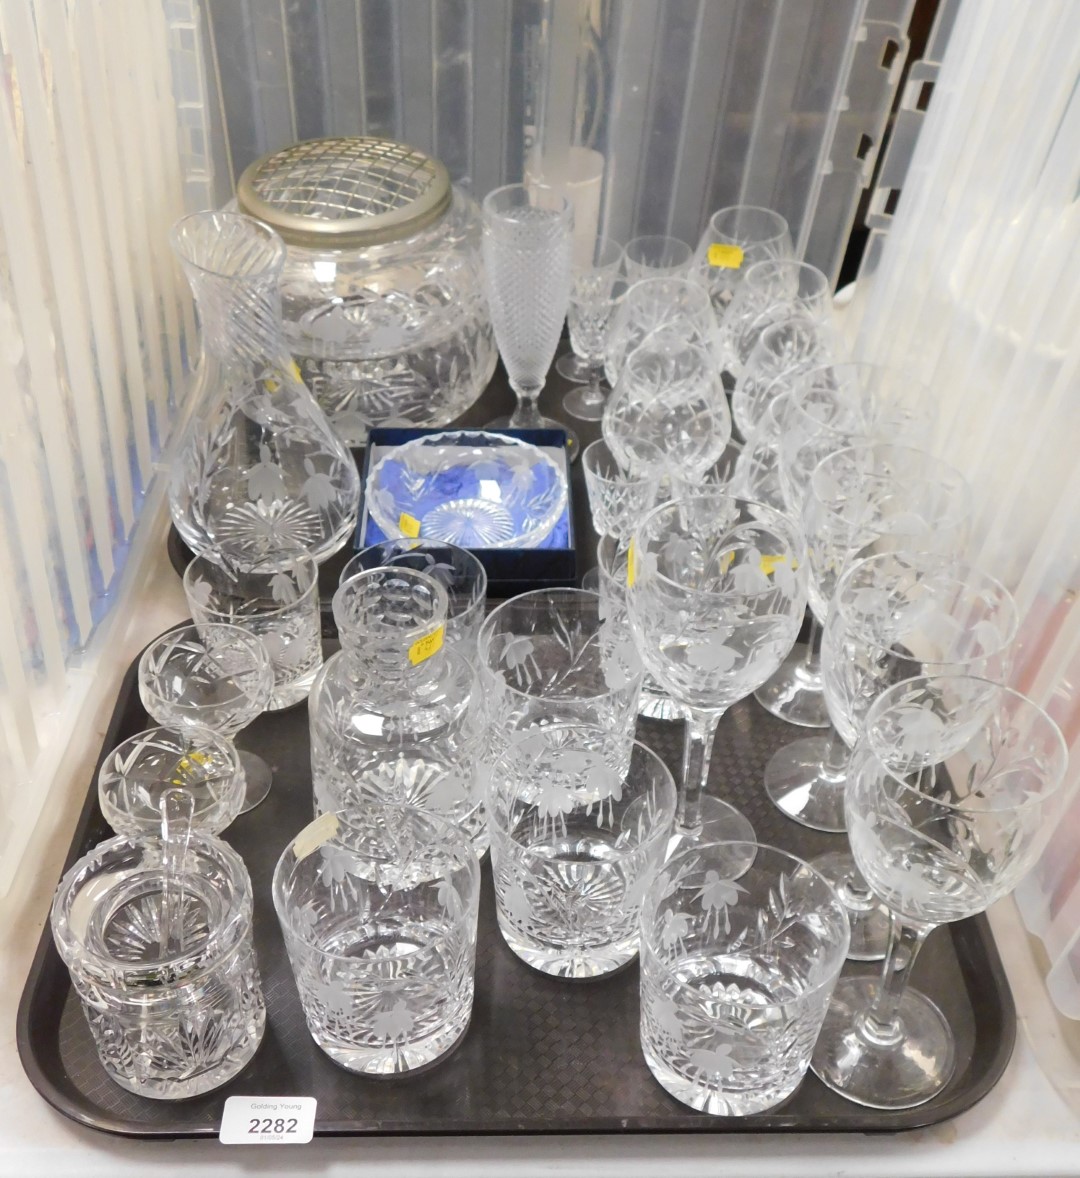 Glassware, items include vases, central rose bowl, brandy glasses, etched wine glasses, tumblers.